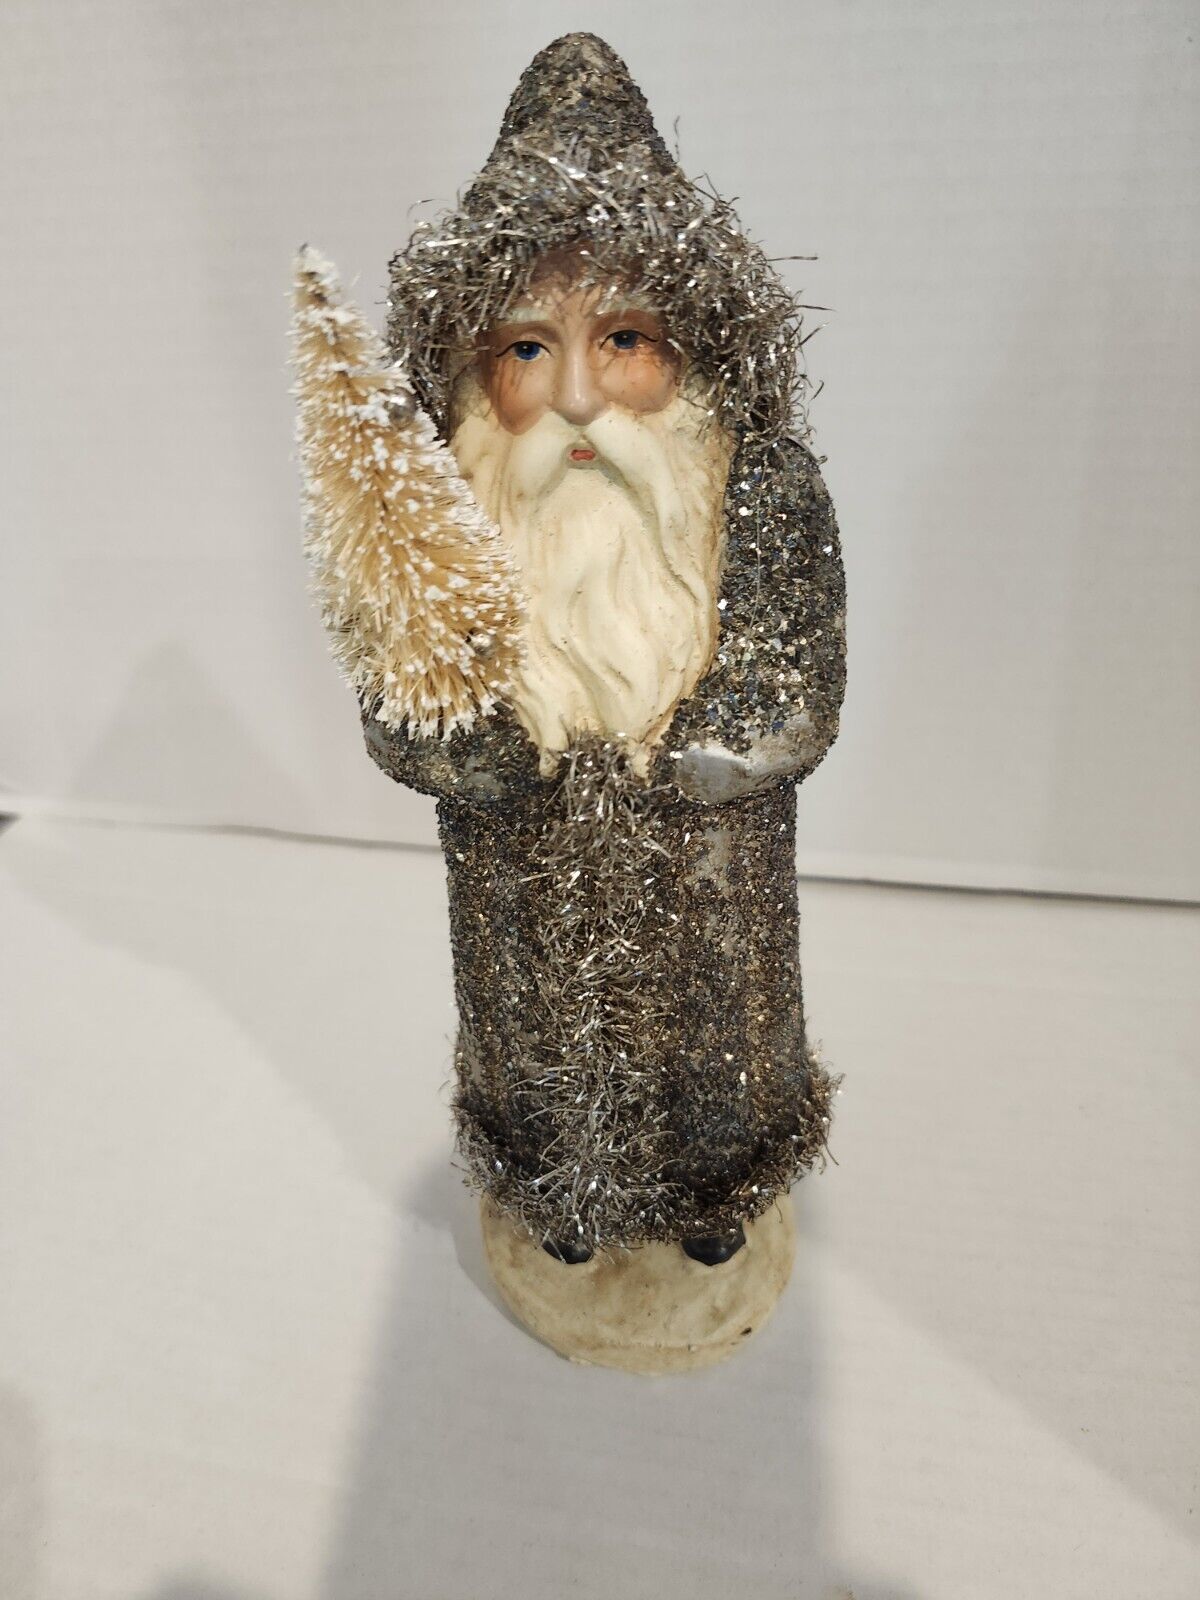 Primitive Belsnickle Silver Glitter Santa Claus Figure with Tree 10